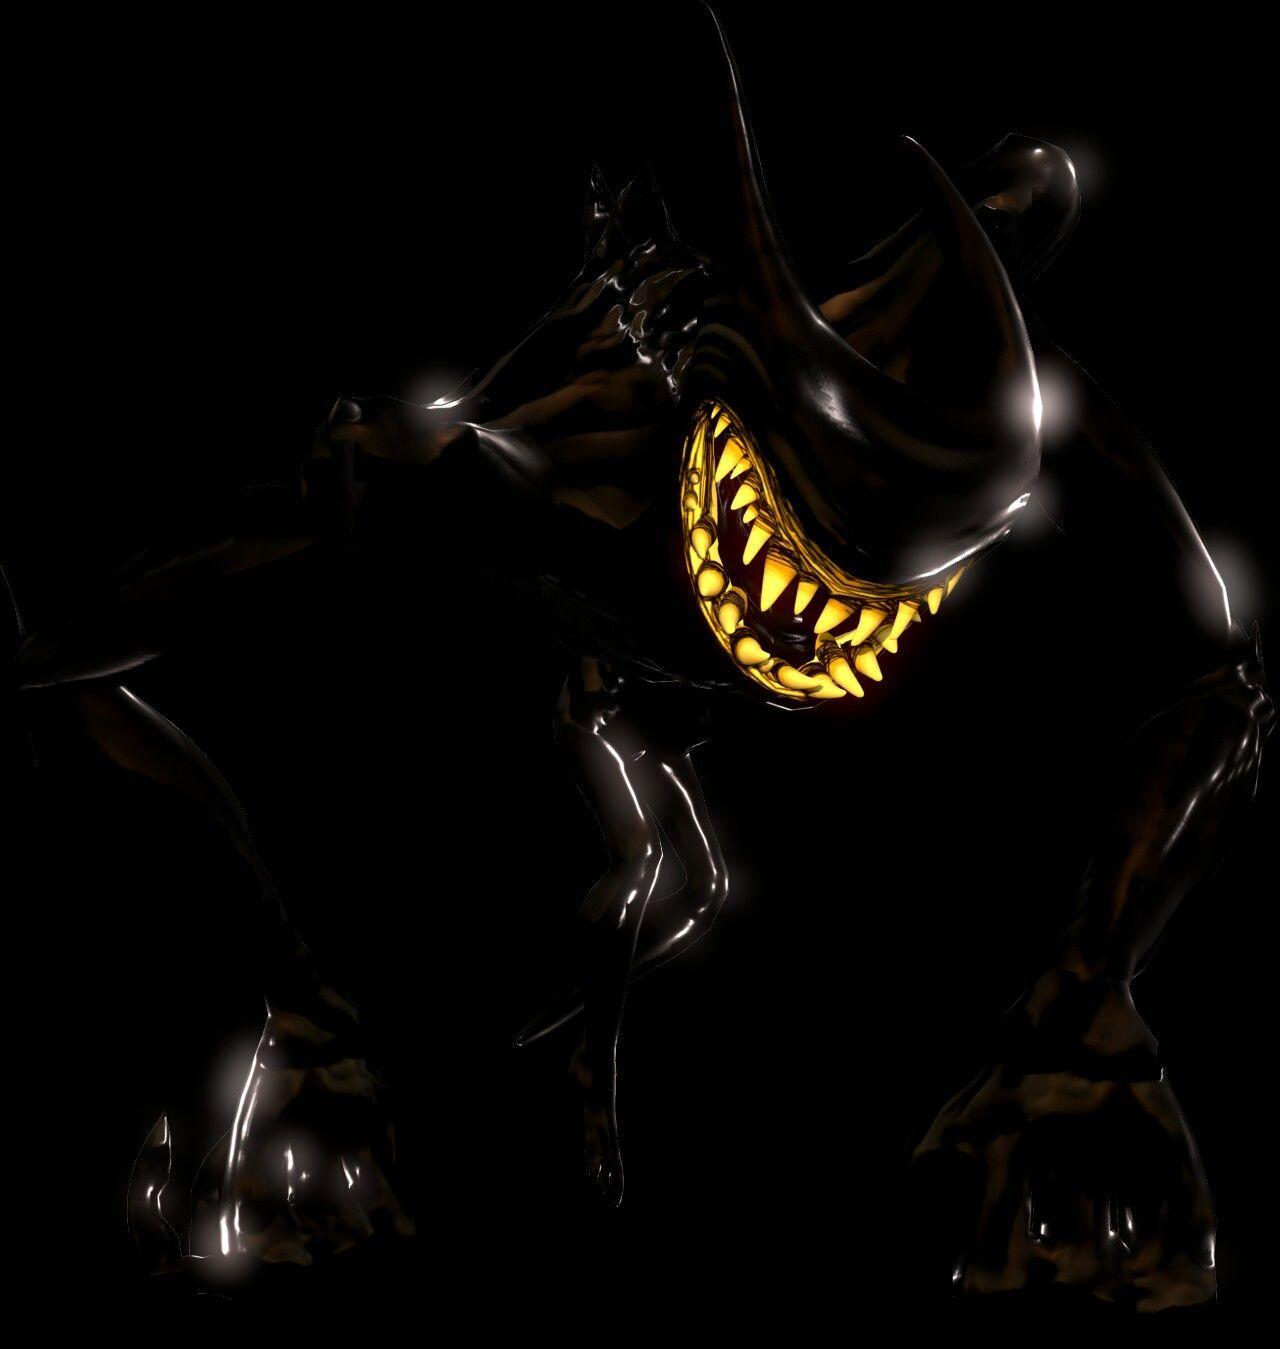 Bendy and the ink machine wallpaper by Toreshi on DeviantArt